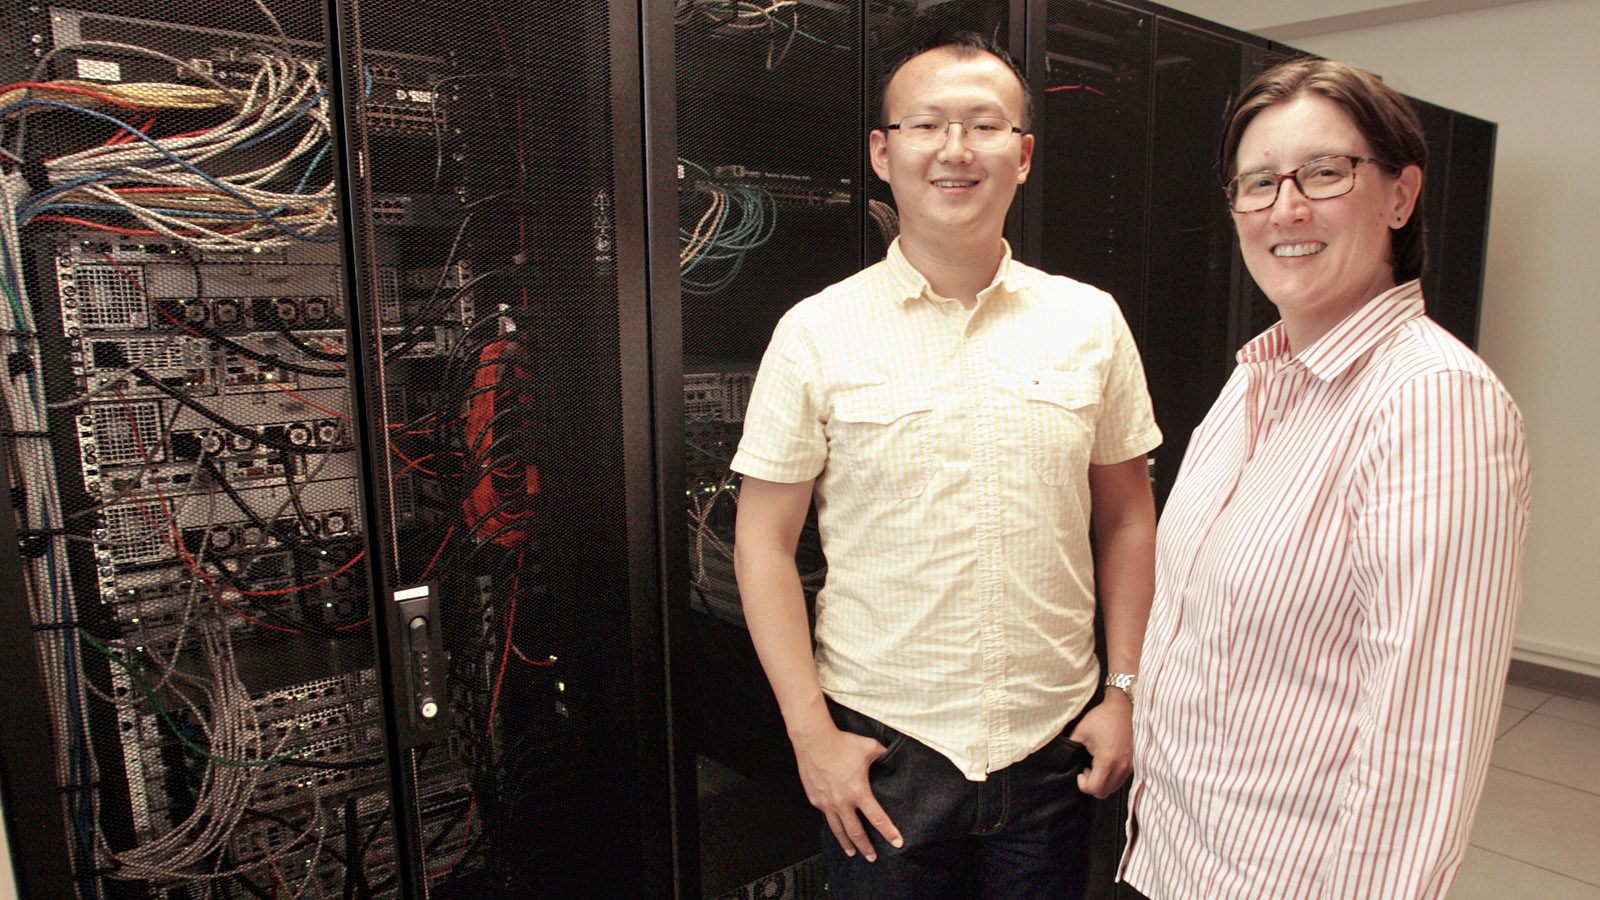 Graduate student and professor stand in front of server rack